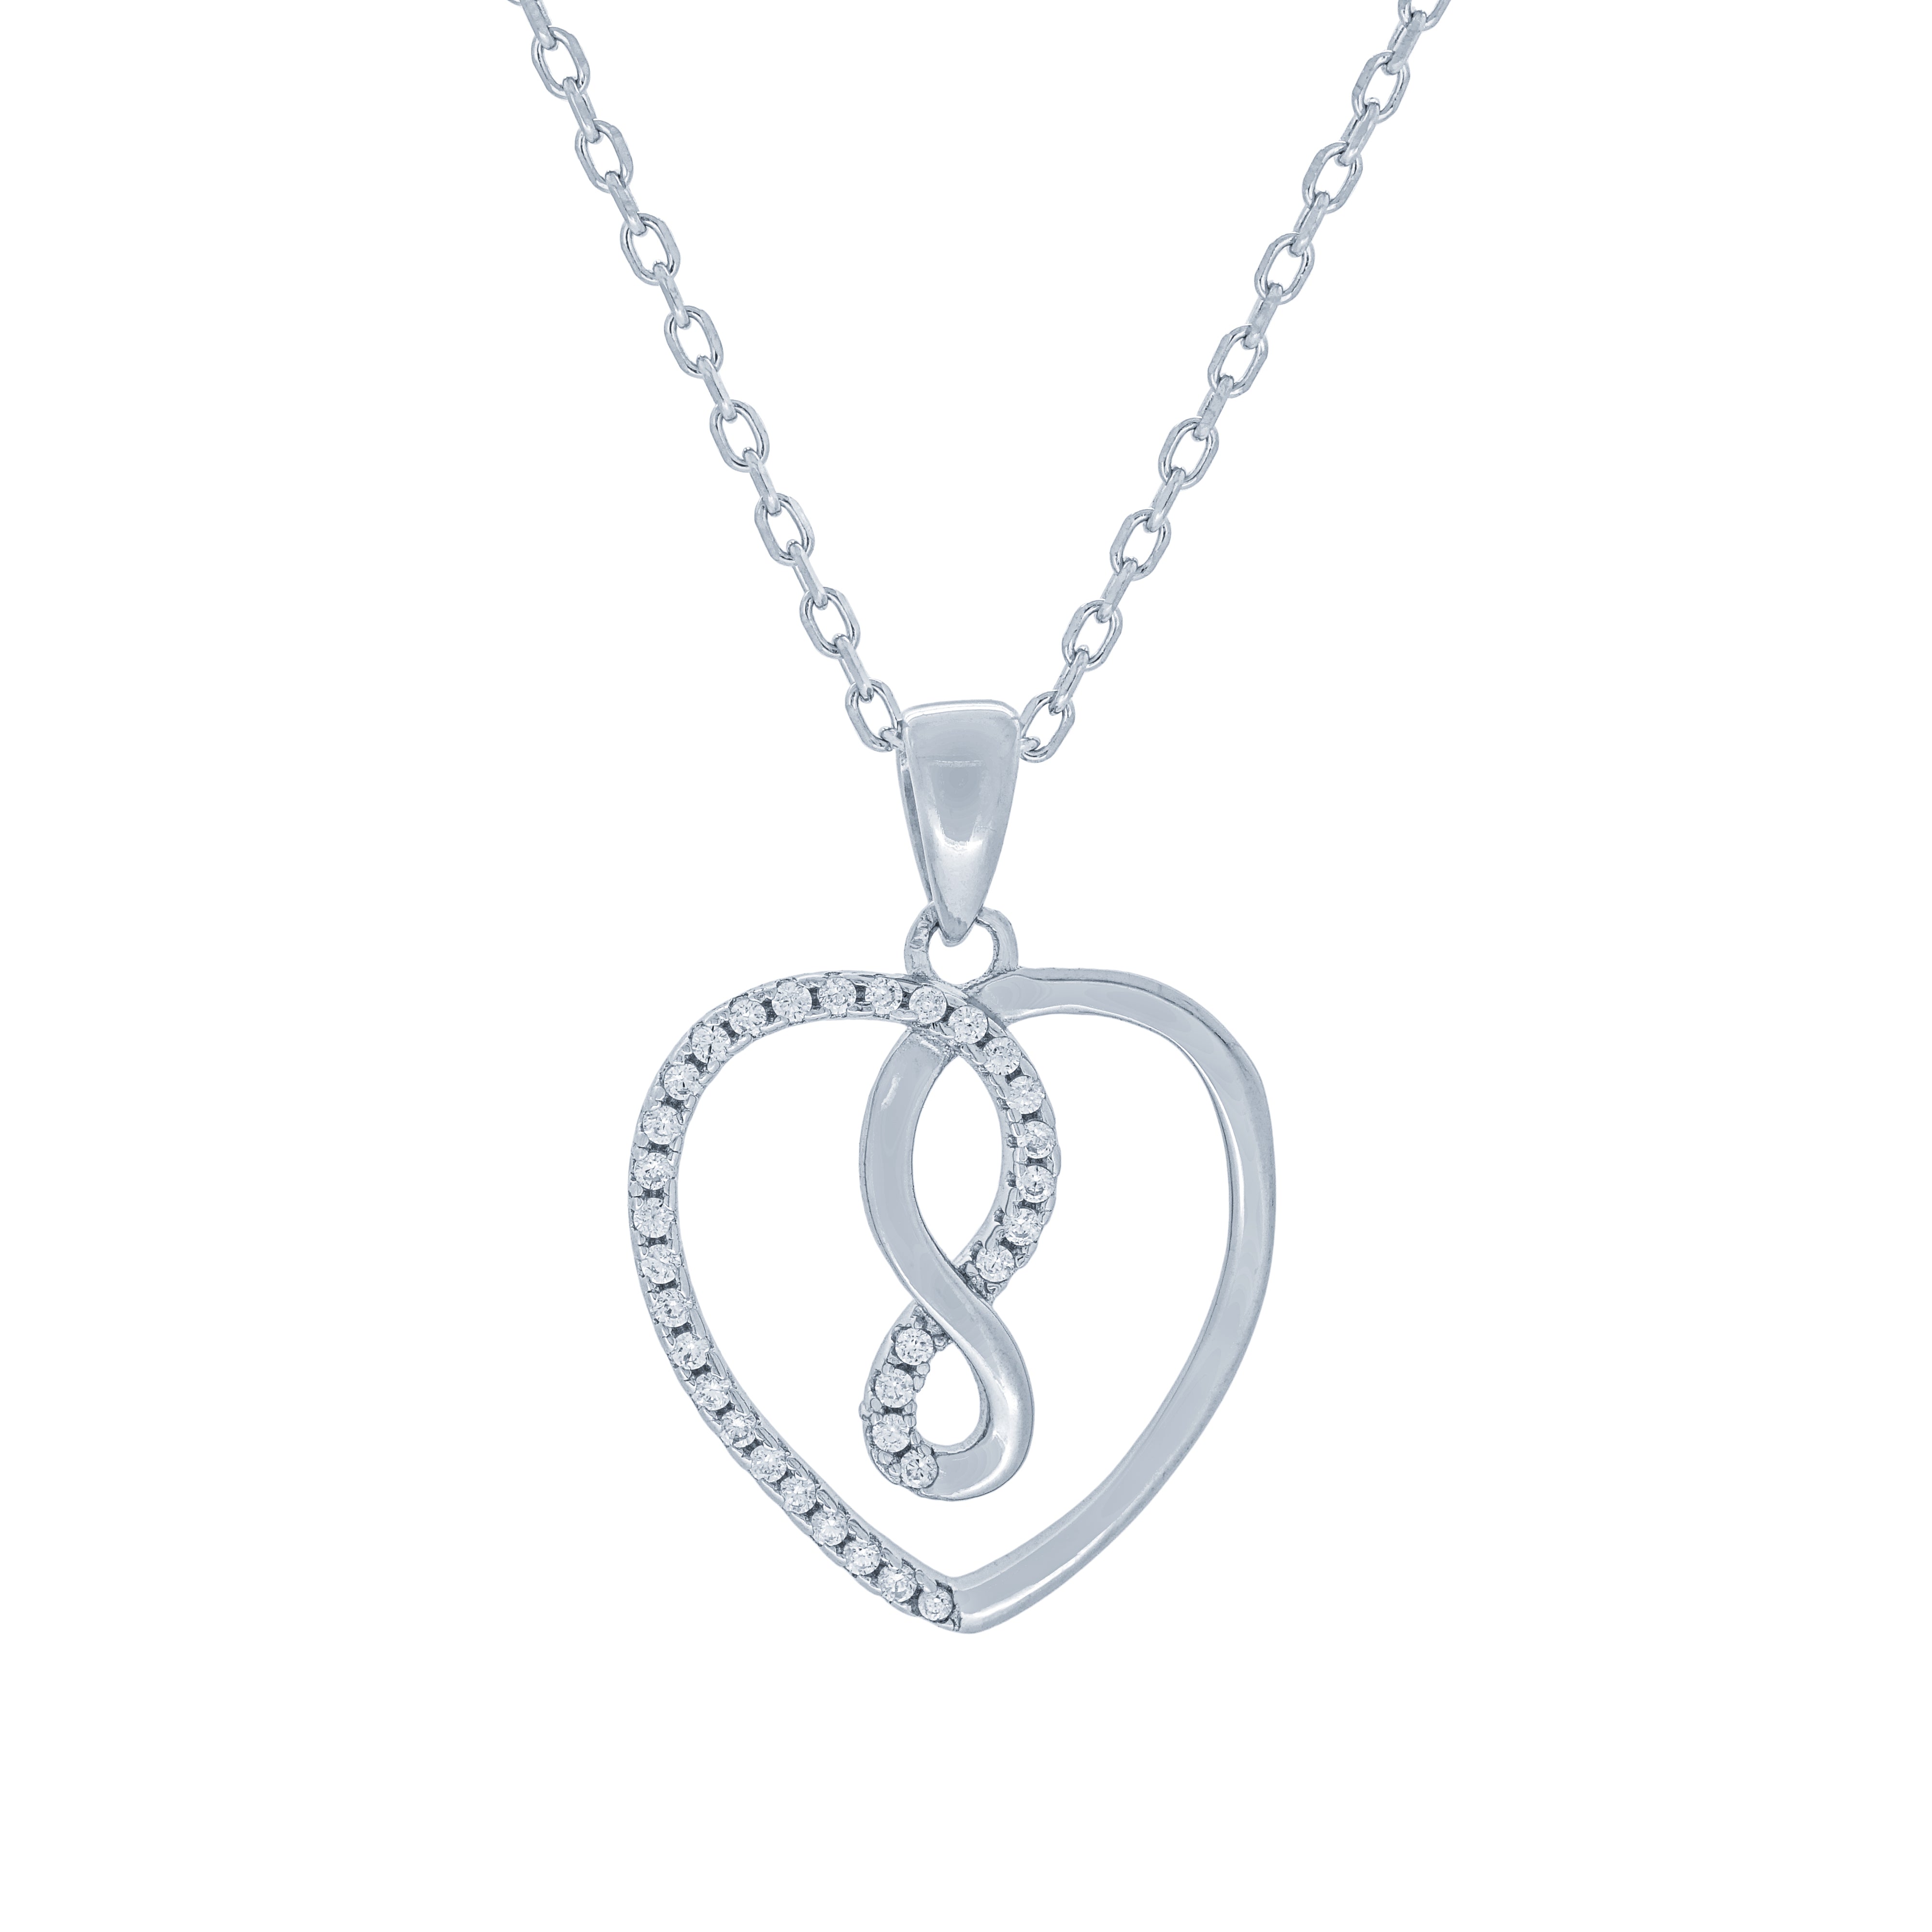 (100145) White Cubic Zirconia Infinity Heart Pendant Necklace In Sterling Silver